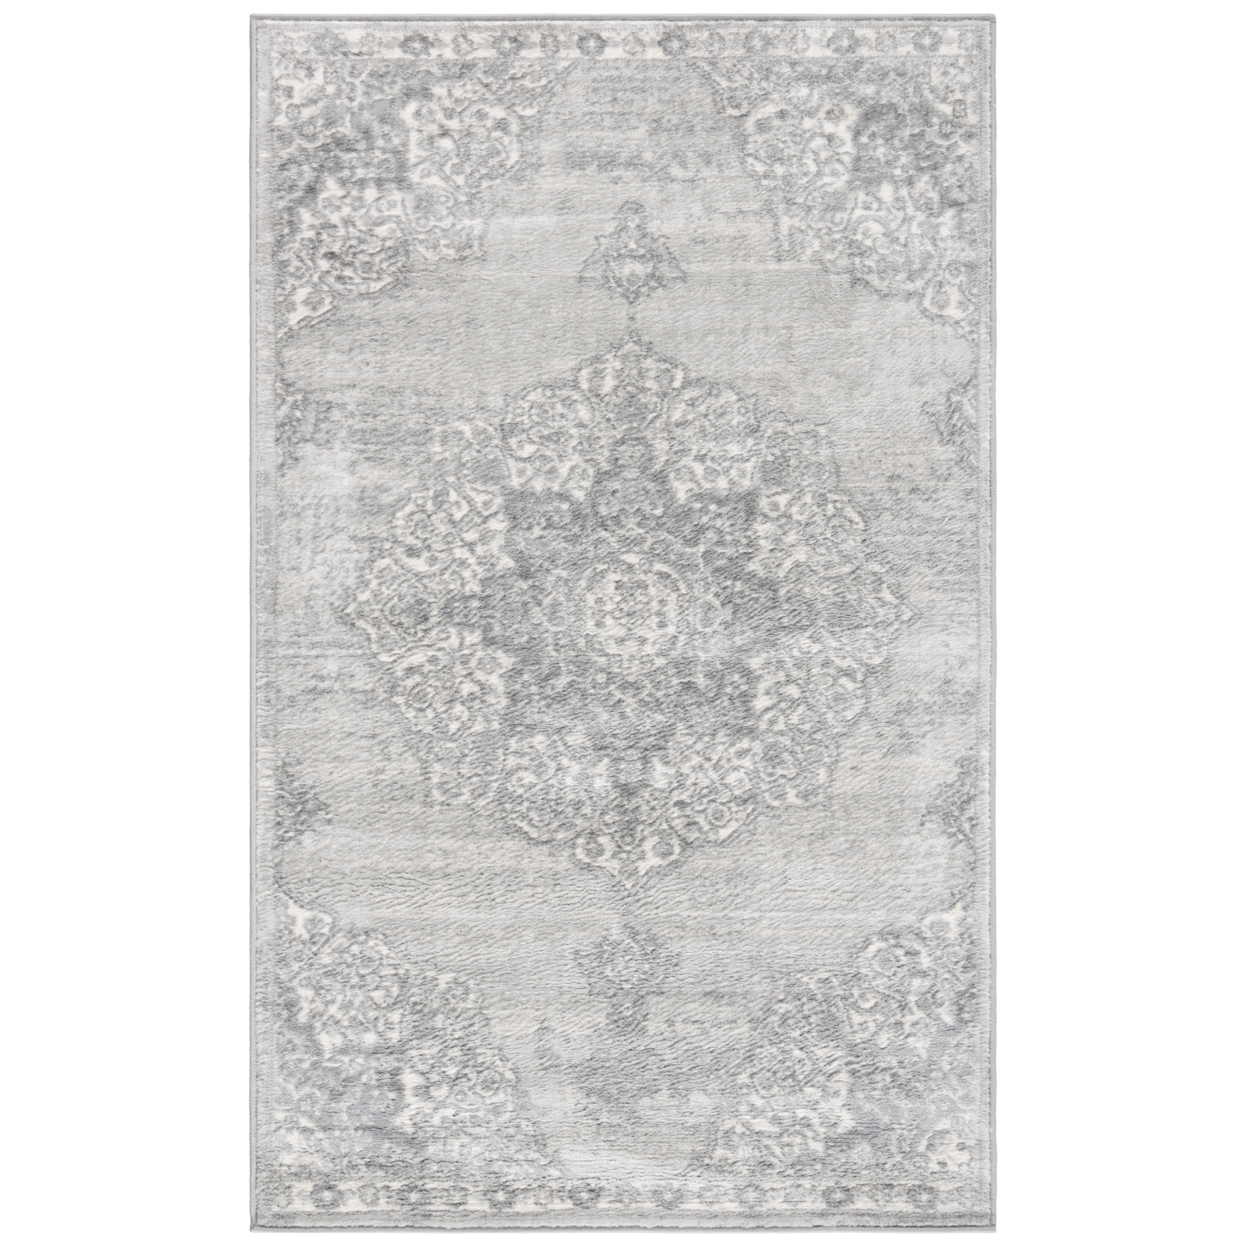 SAFAVIEH Brentwood Collection BNT802F Grey / Ivory Rug - 2' X 14'